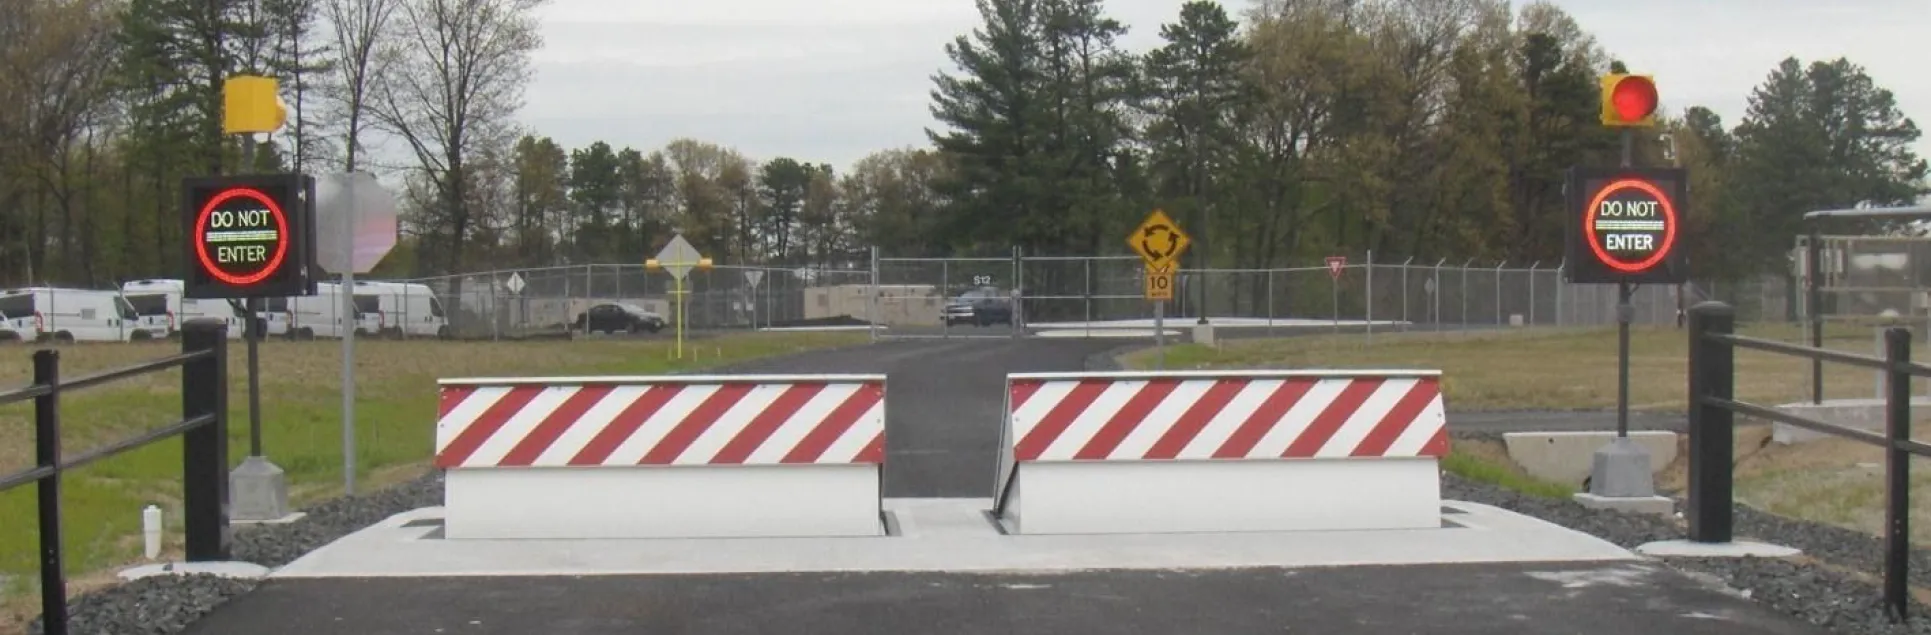 Delta Scientific's red and white striped wedge barriers with 'Do Not Enter' signs and red traffic lights, securing a government federal building's perimeter against unauthorized vehicle access.